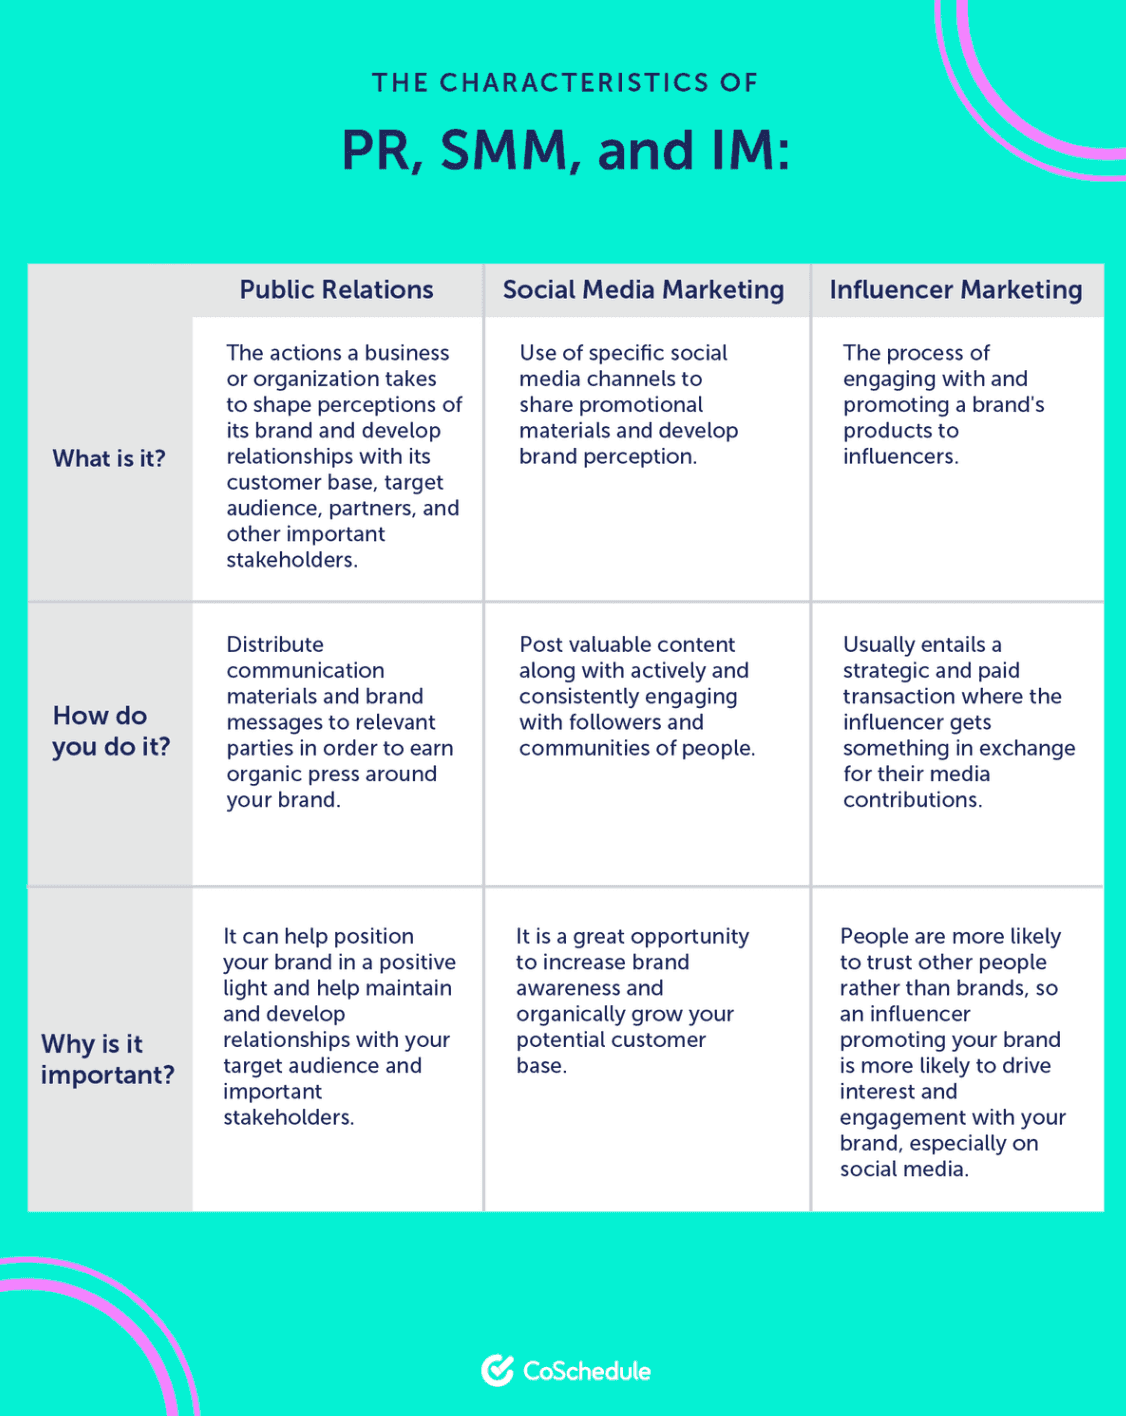 CoSchedule graphic of the characteristics of PR, SMM, and IM